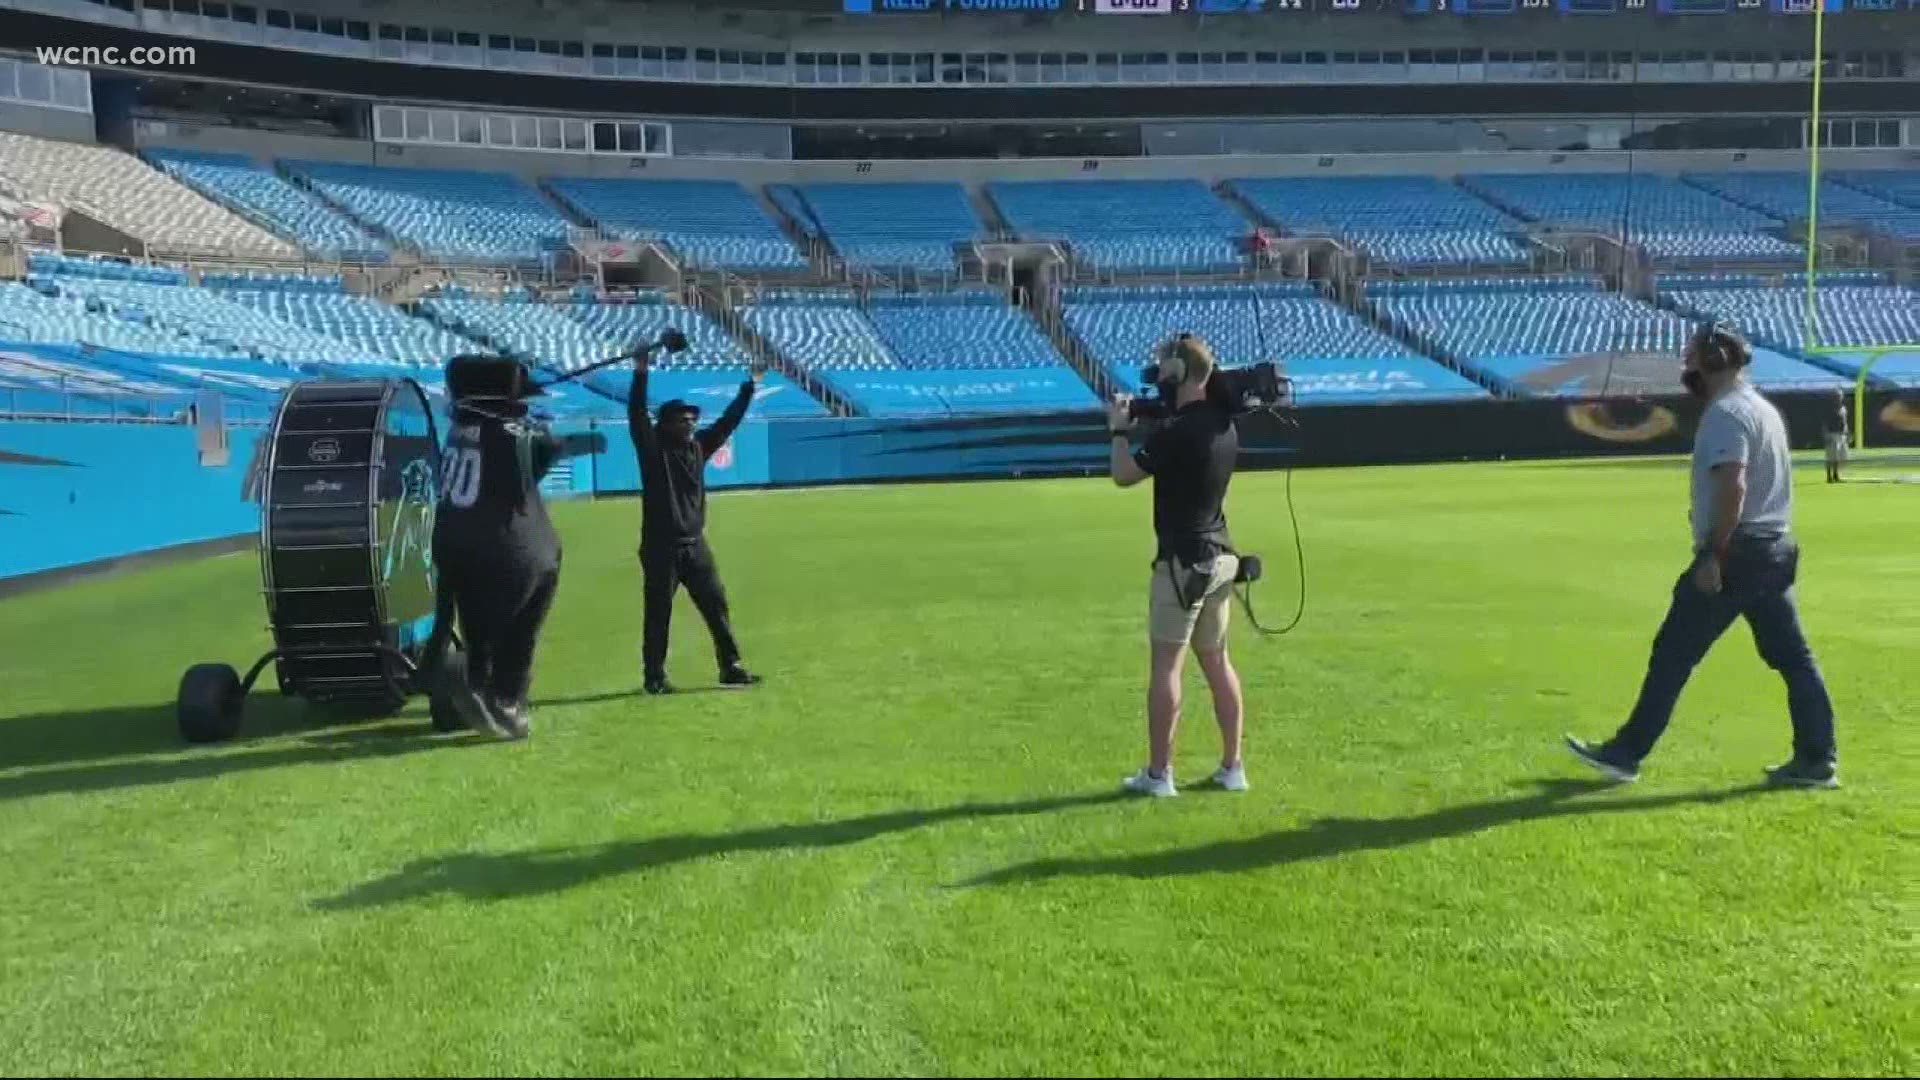 Ronnie Long, a wrongfully convicted North Carolina man, beats the Carolina Panthers drum ahead of Sunday's game in Charlotte.